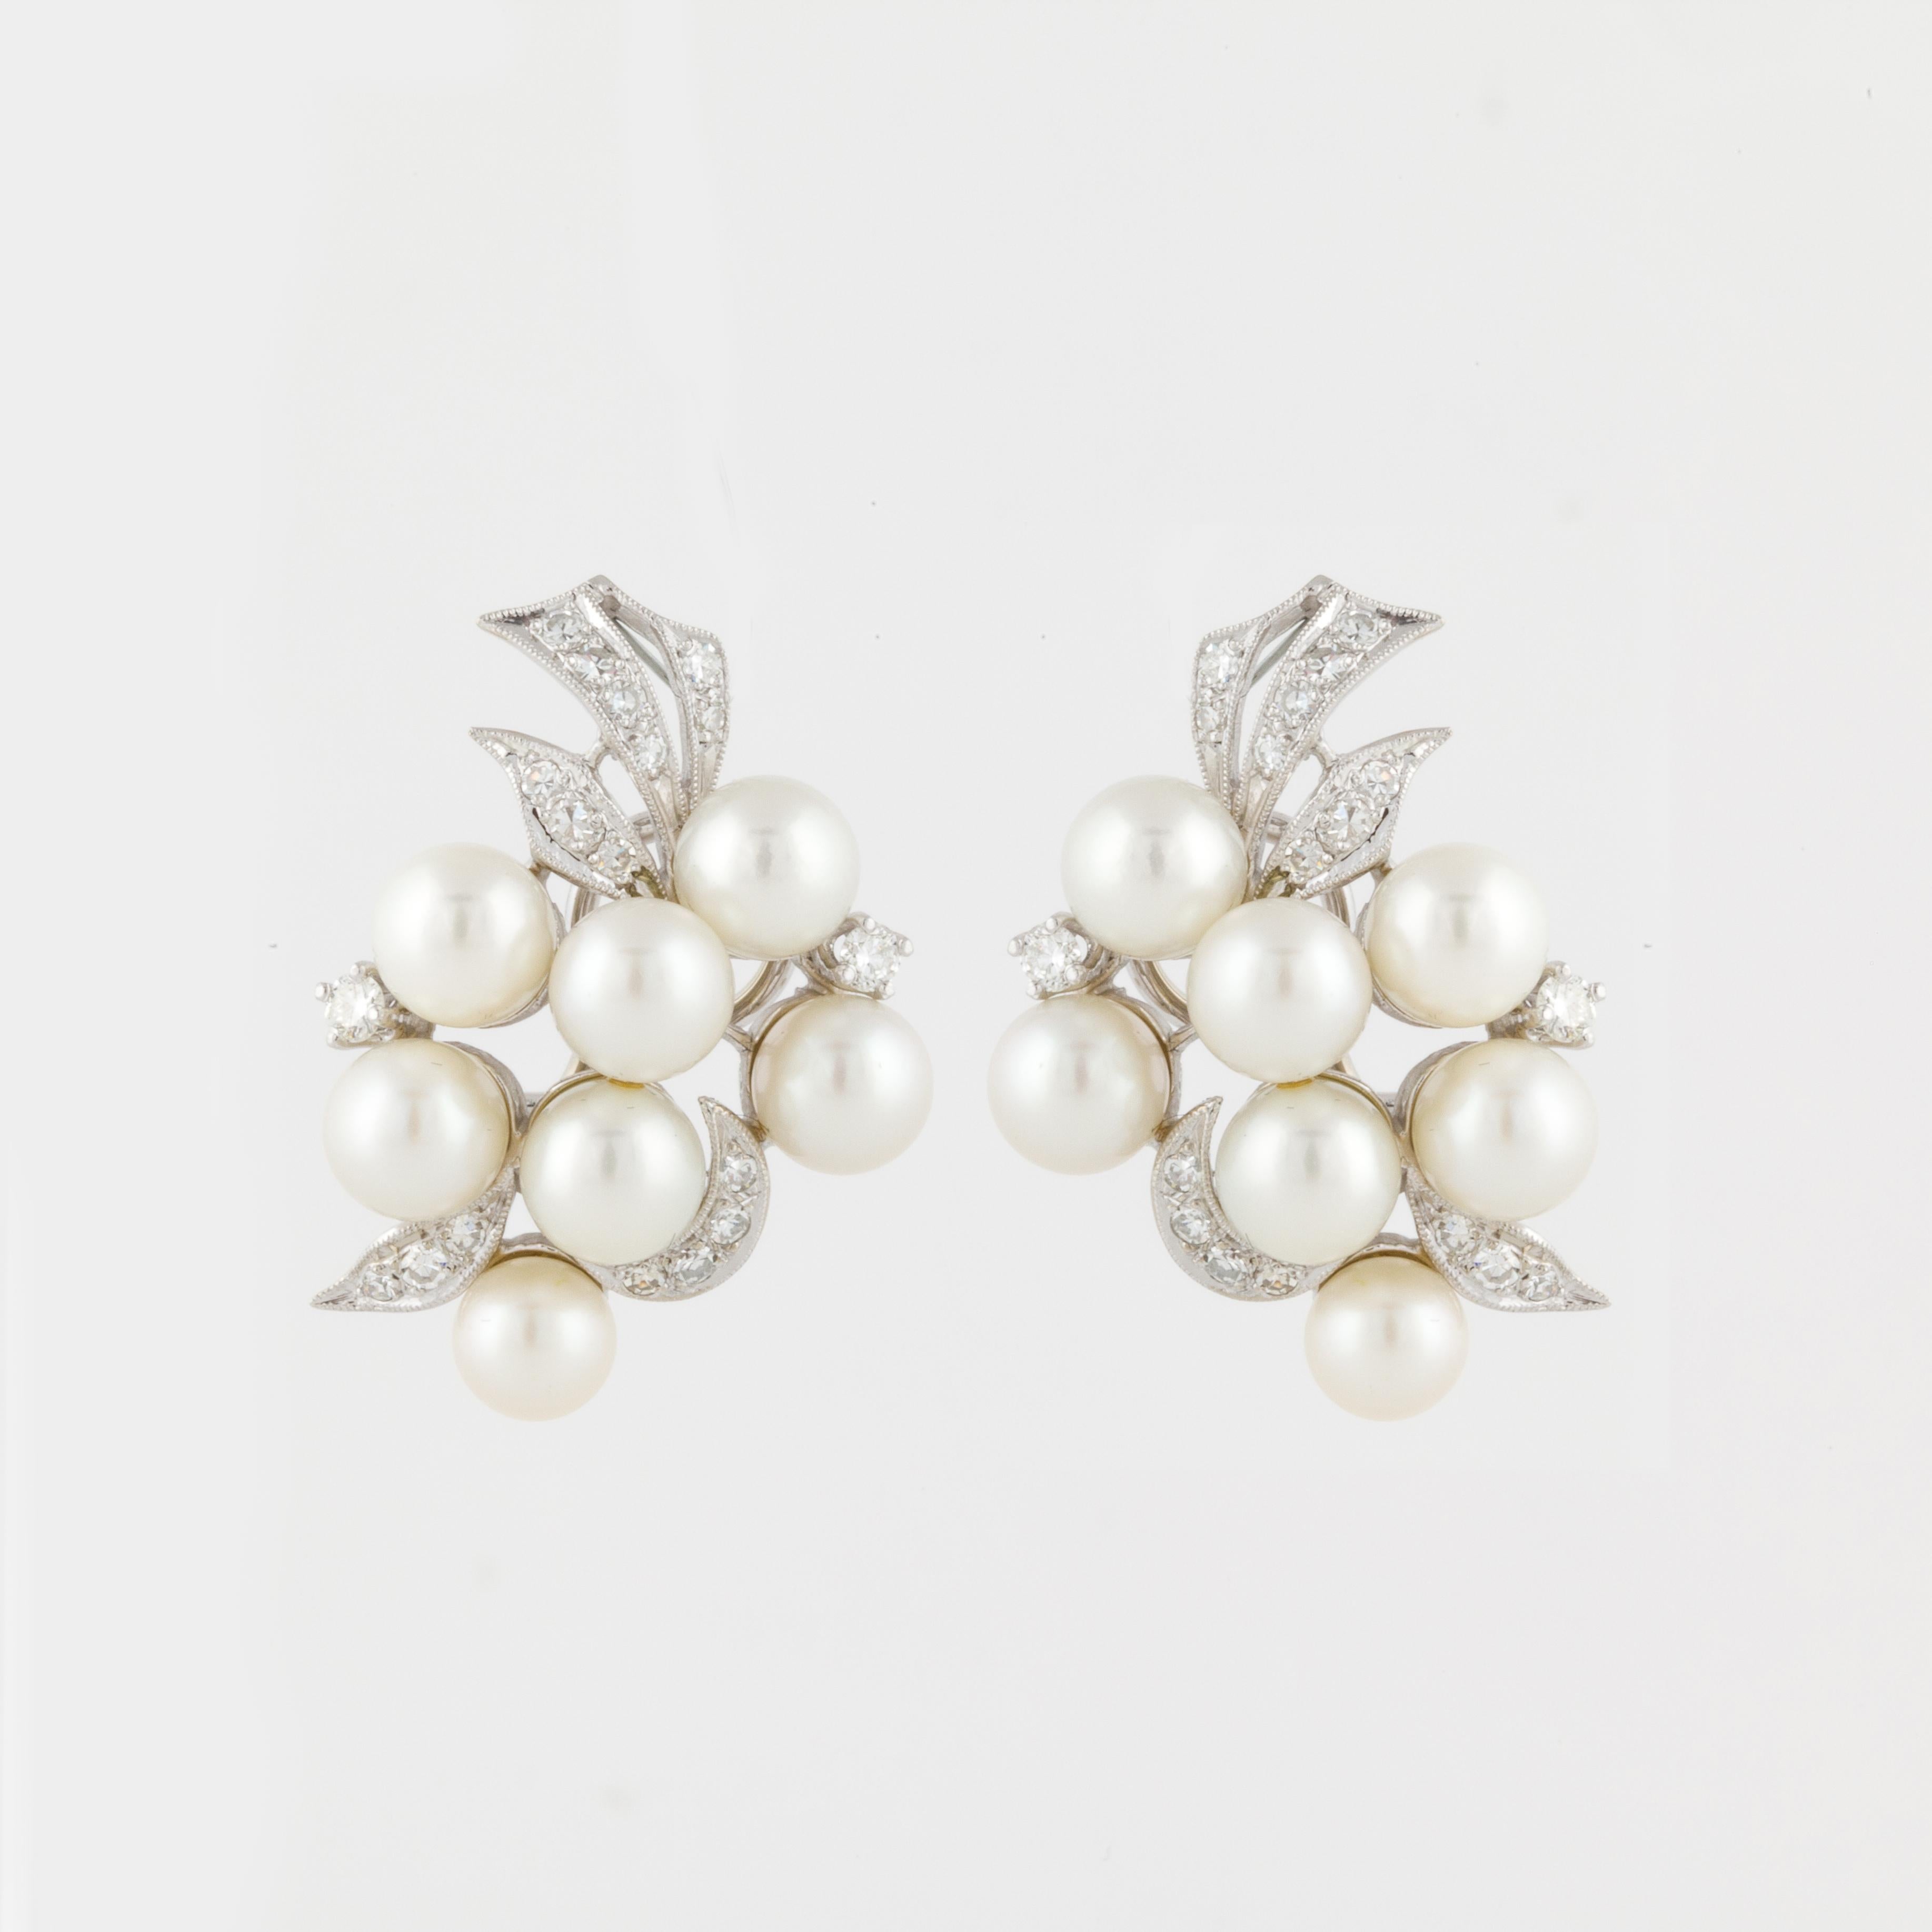 Pair of cluster earrings with cultured pearls and diamonds in 14K white gold.  There are fourteen (14) cultured pearls with thirty-six (36) diamonds that total 0.60 carats.  They measure 1 1/4 inches long and 1 inch wide. These earrings are a clip